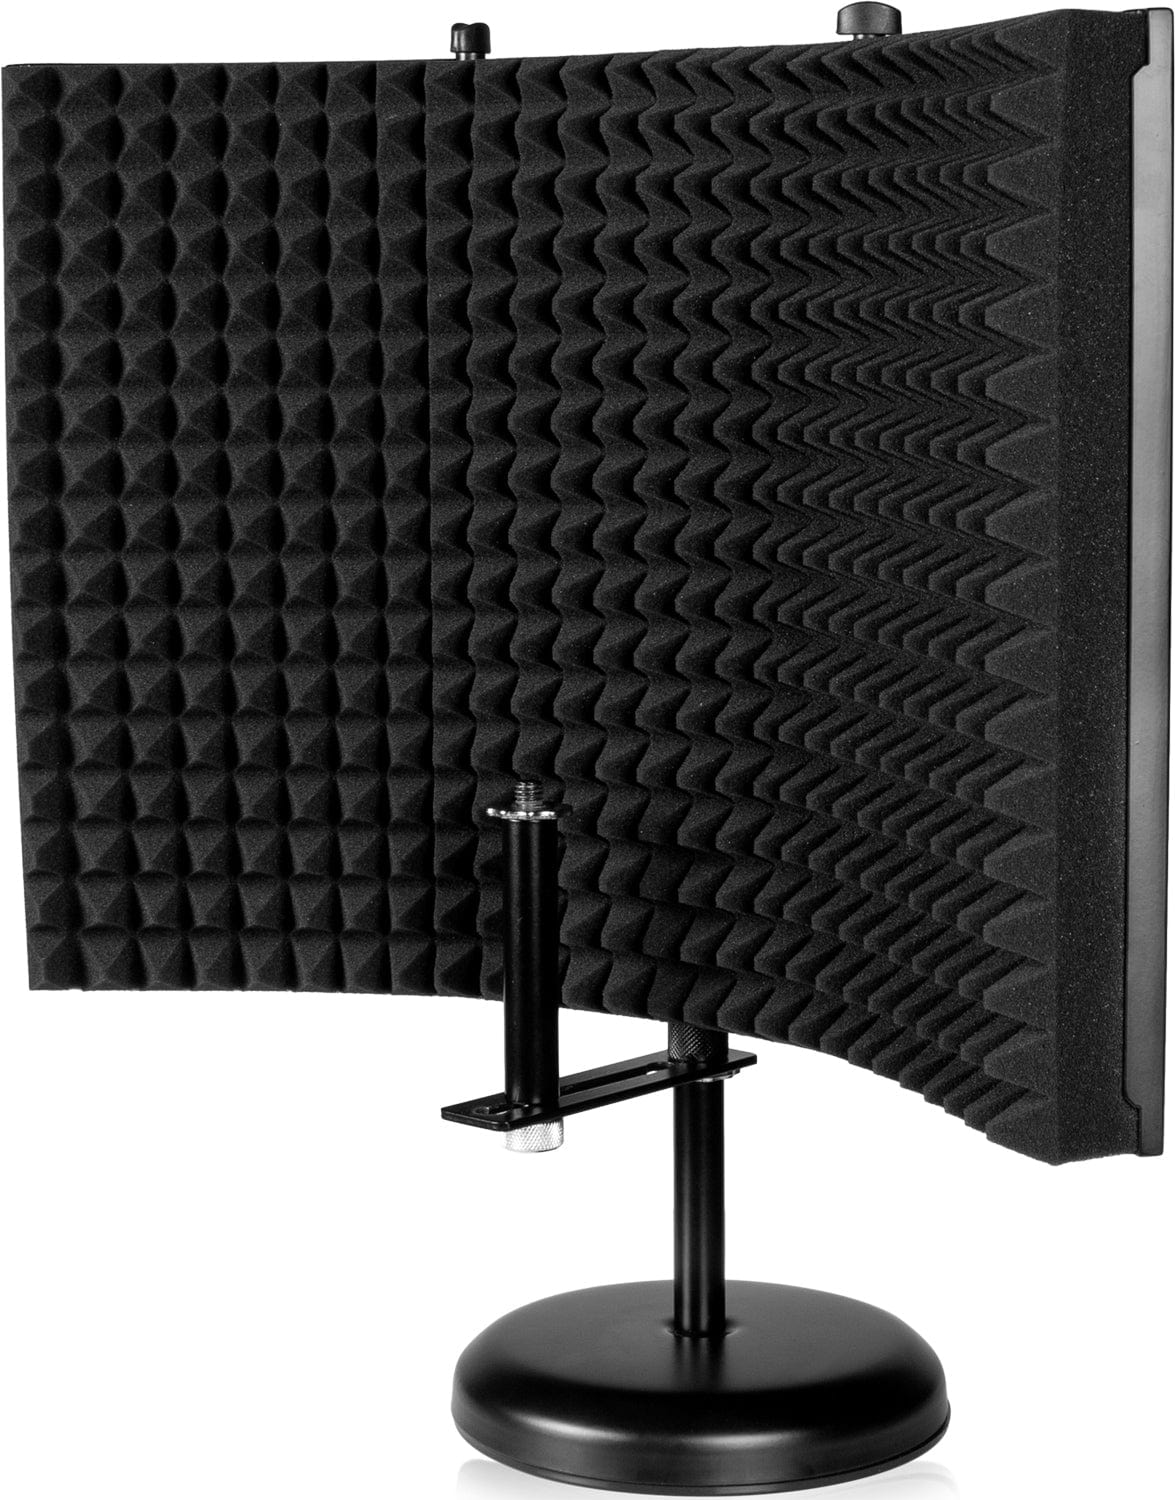 Gator GFW-MICISO1216 Frameworks Desk 12x16-inch Microphone Isolation Shield - PSSL ProSound and Stage Lighting